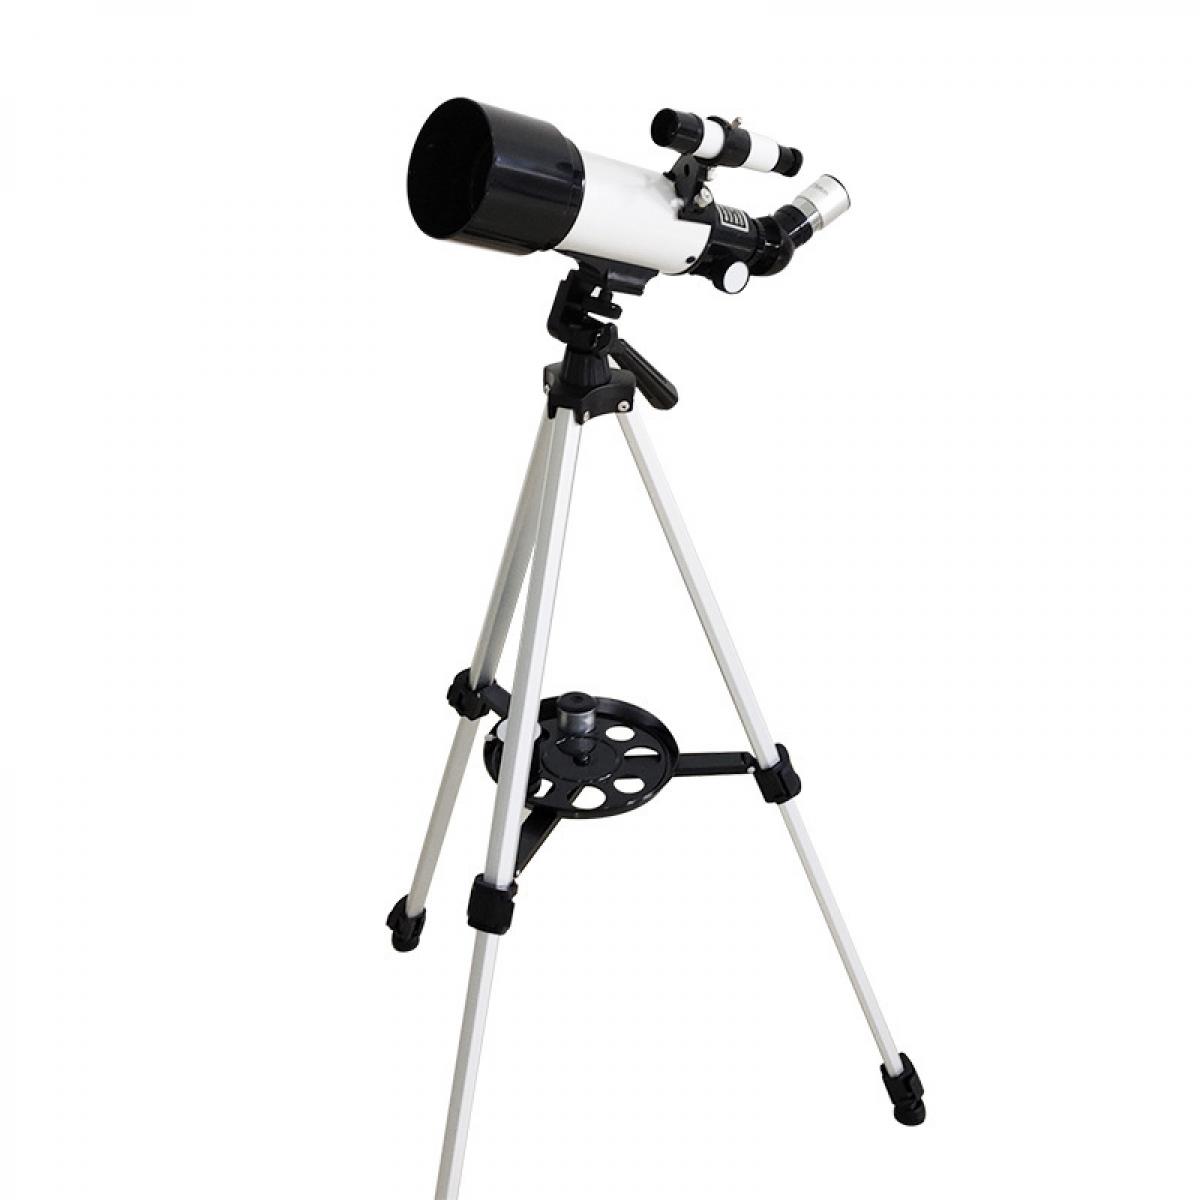 Portable Astronomical Refractor Telescope for Moon Viewing USCAMEL Telescope for Kids and Beginners,70mm Aperture 400mm Astronomy Telescopes with Cellphone Adapter,Backpack and Adjustable Tripod 